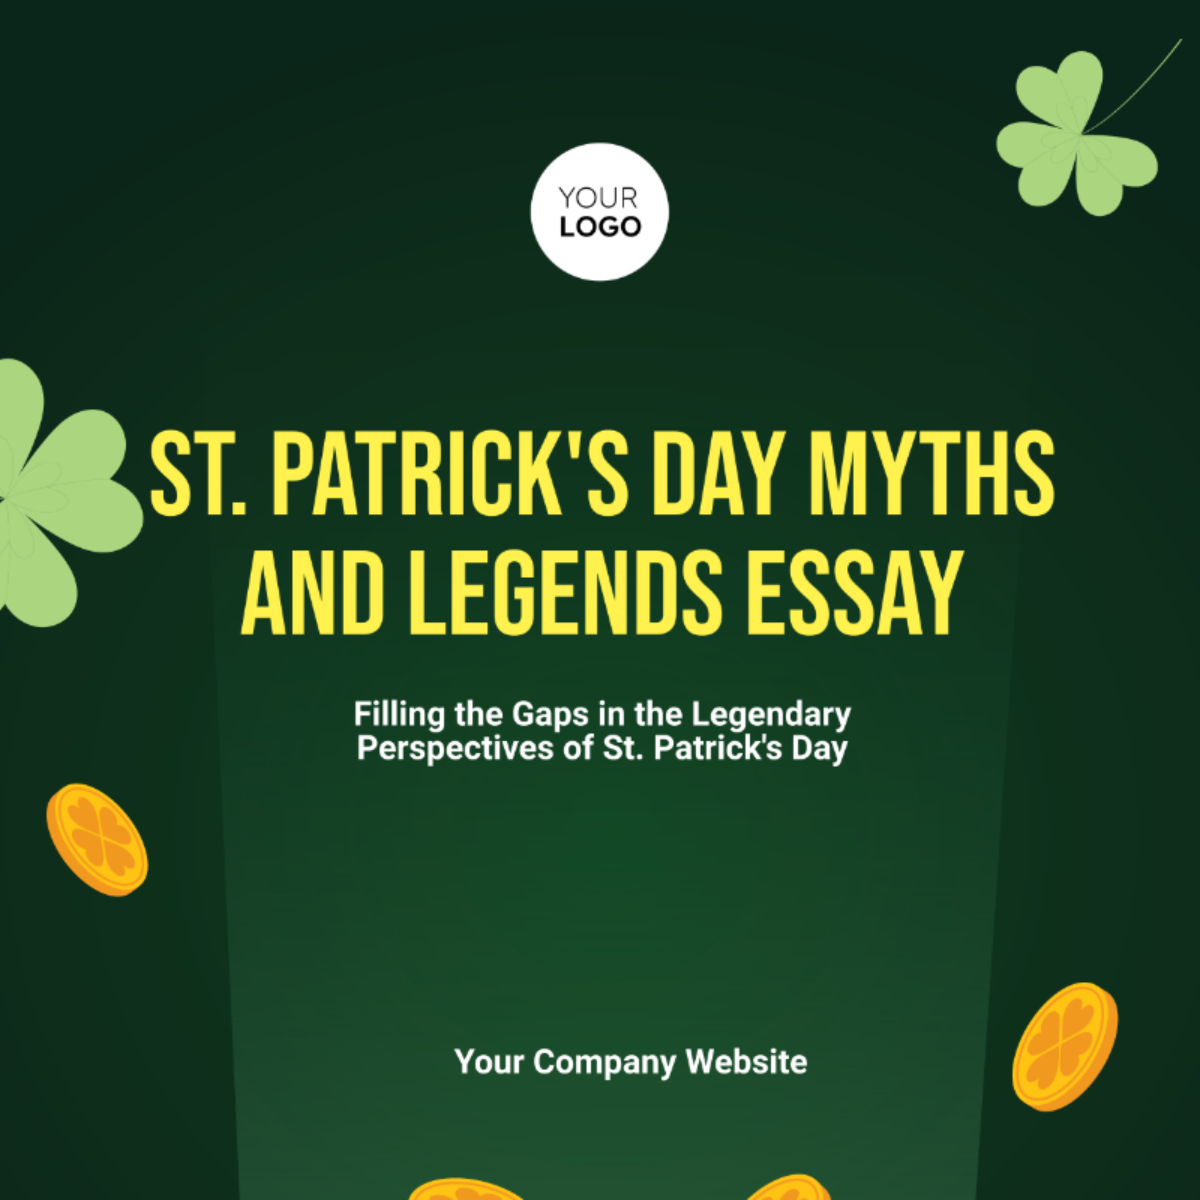 St. Patrick's Day: Beyond the Myths and Legends Essay Template